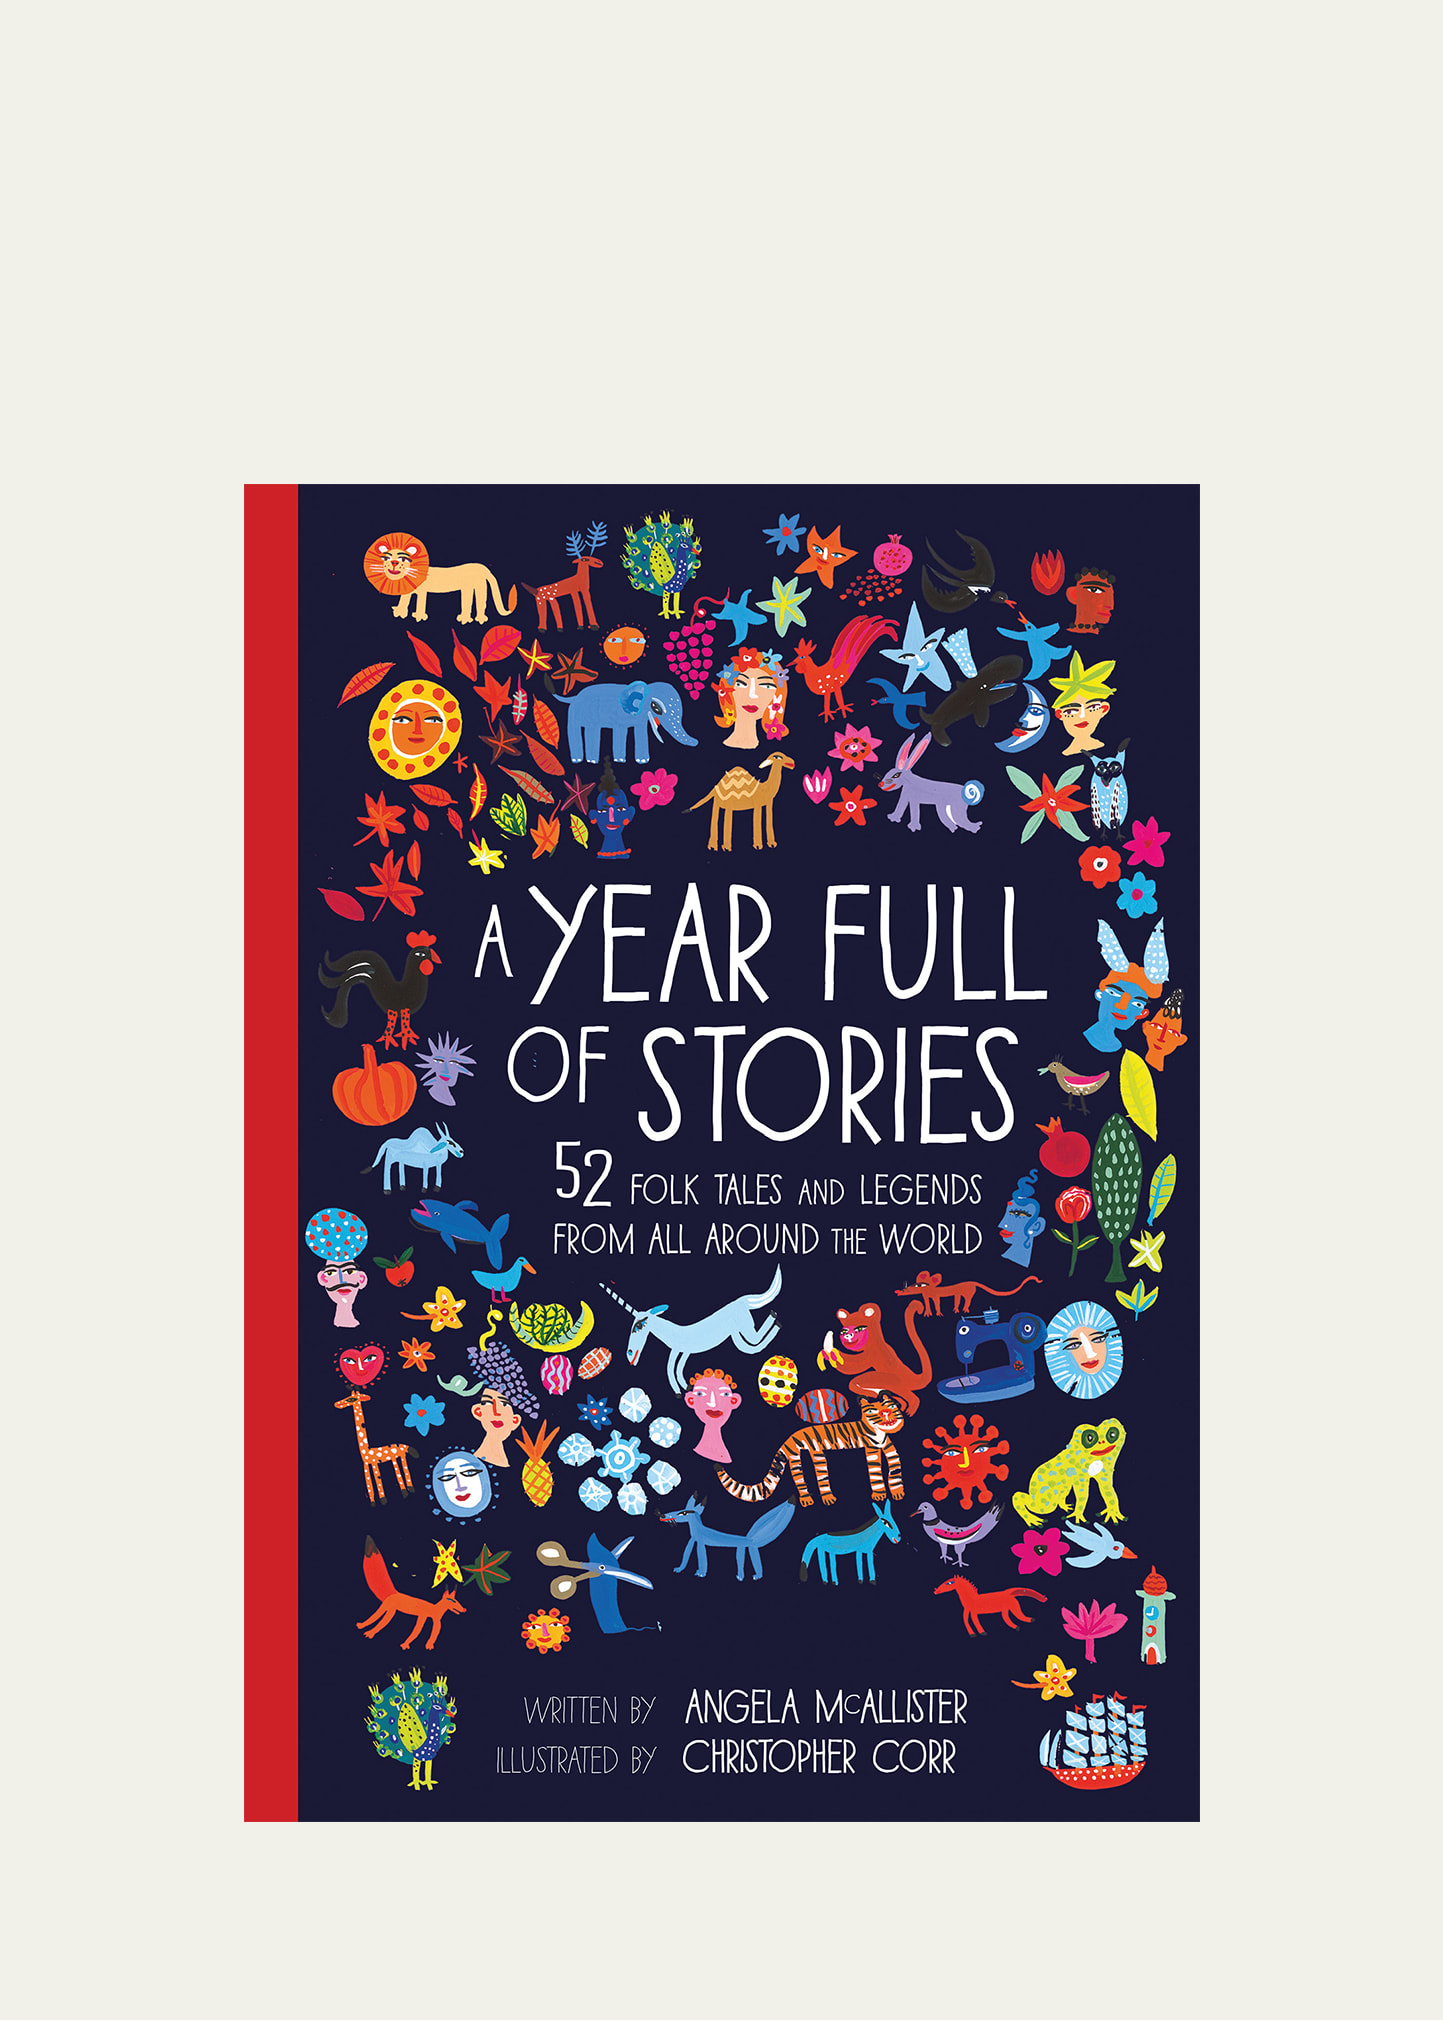 "A Year Full of Stories: 52 Folk Tales and Legends From All Around the World" Book